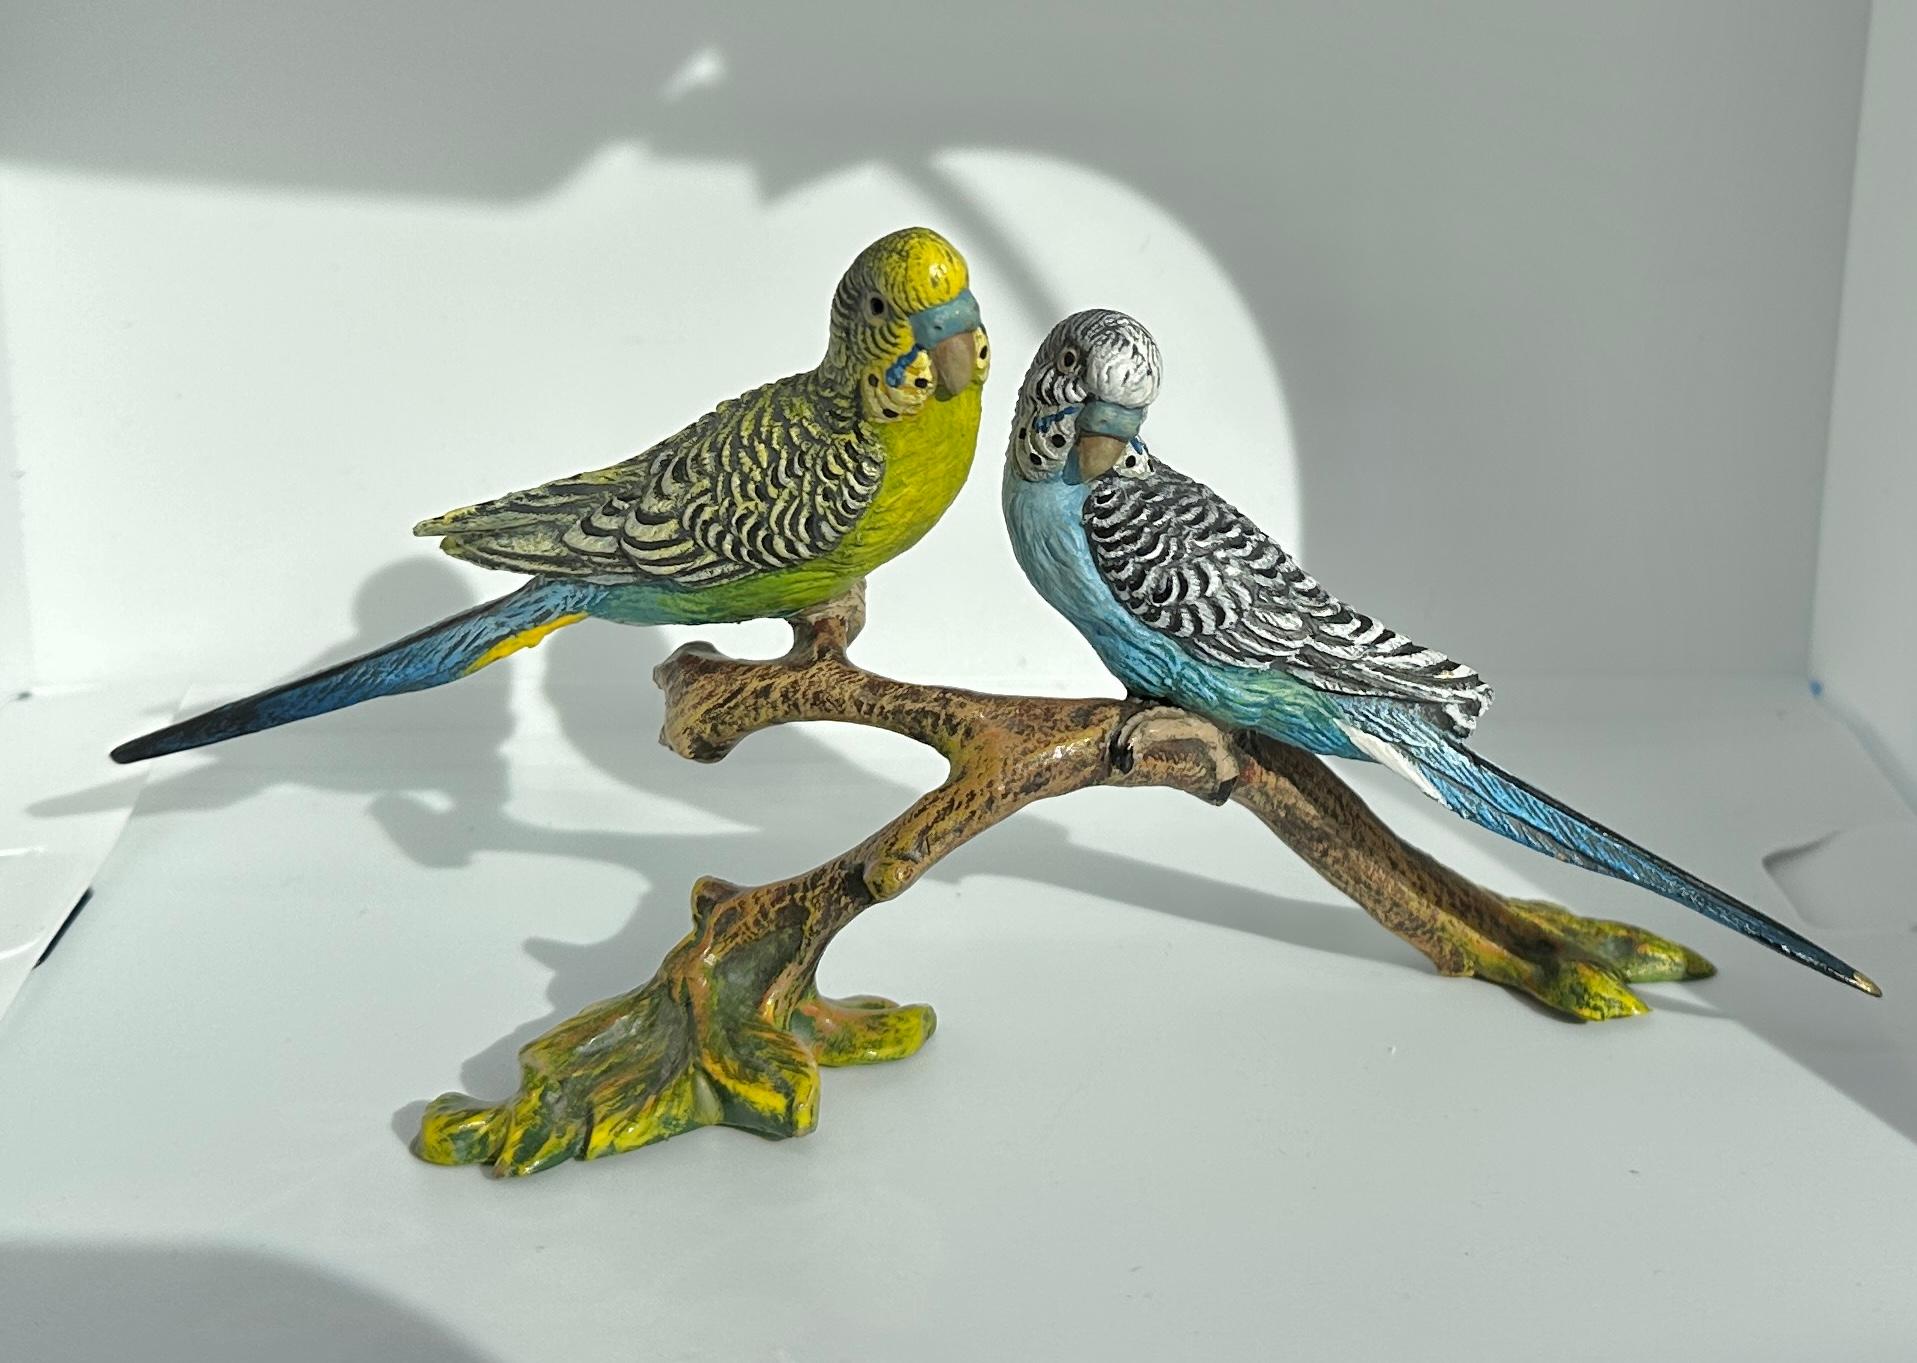 THIS IS A SUPERB BERGMAN AUSTRIAN VIENNA BRONZE OF TWO PARAKEET BIRDS ON A BRANCH.
This wonderful antique Austrian Vienna Bronze (Bronze de Vienne, Wiener Bronze, Cold Painted Bronze) is so charming with its yellow-green and blue parakeet birds. 